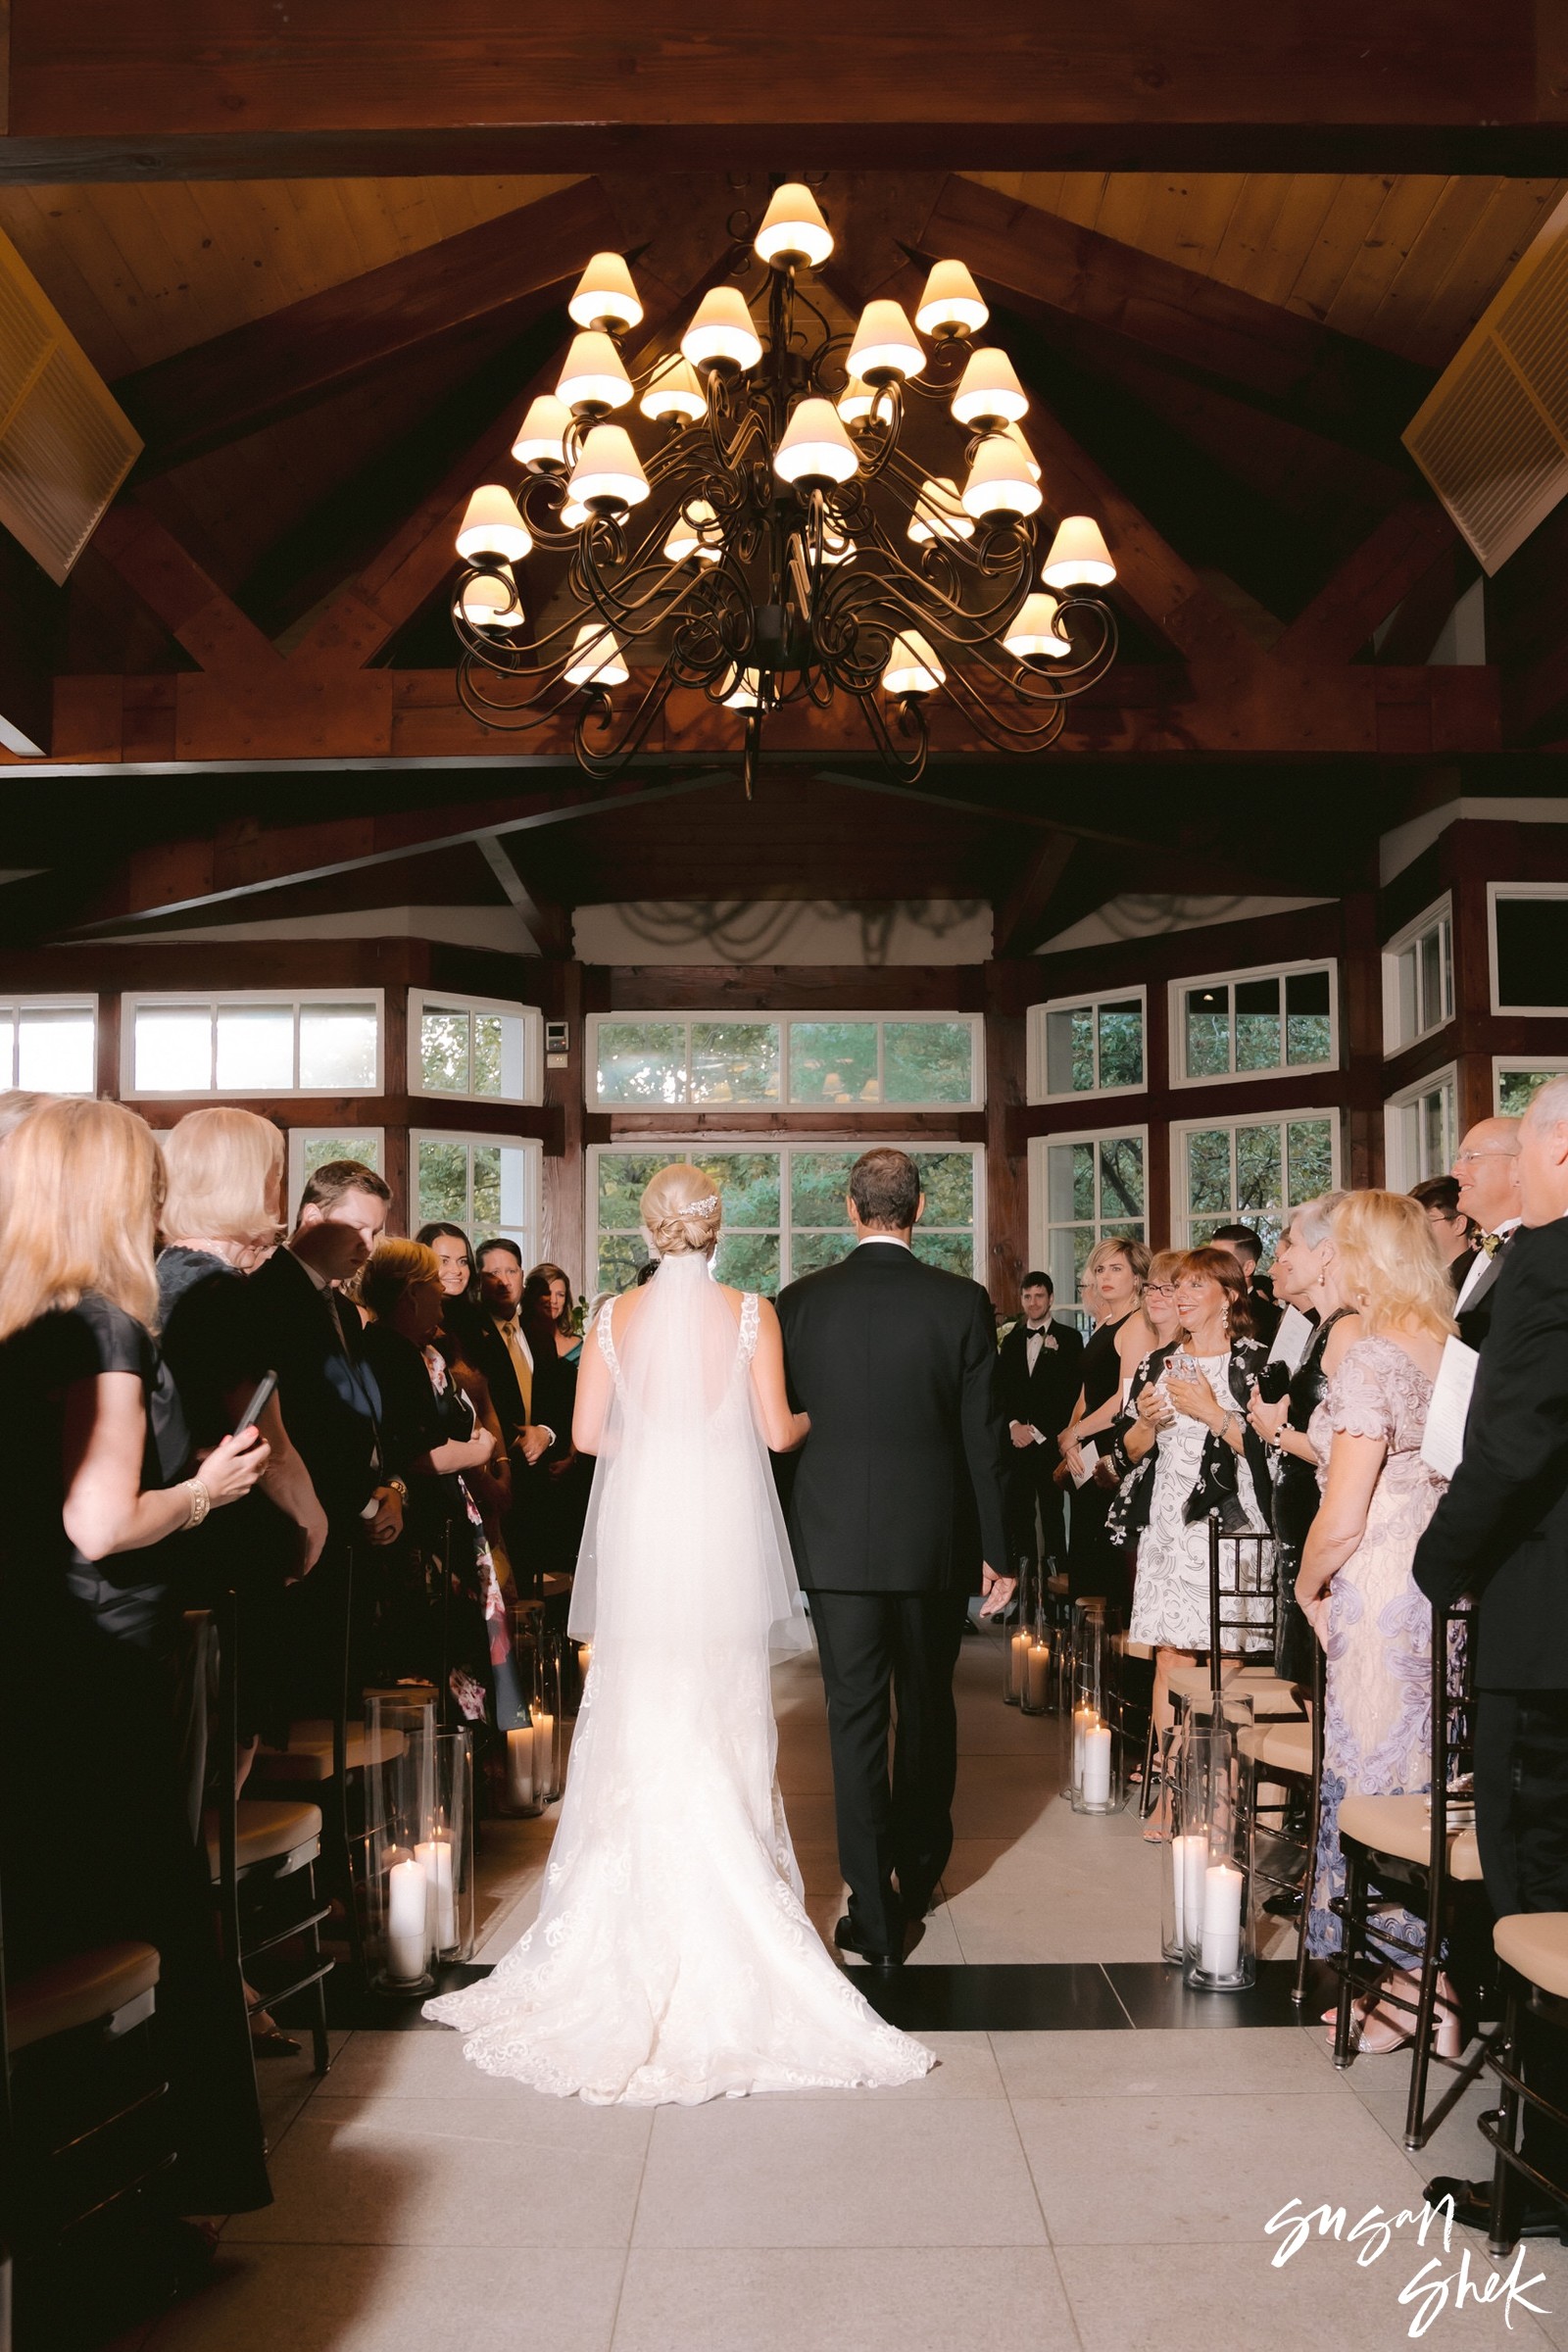 Loeb Boathouse Wedding at Central Park Boathouse in New York City